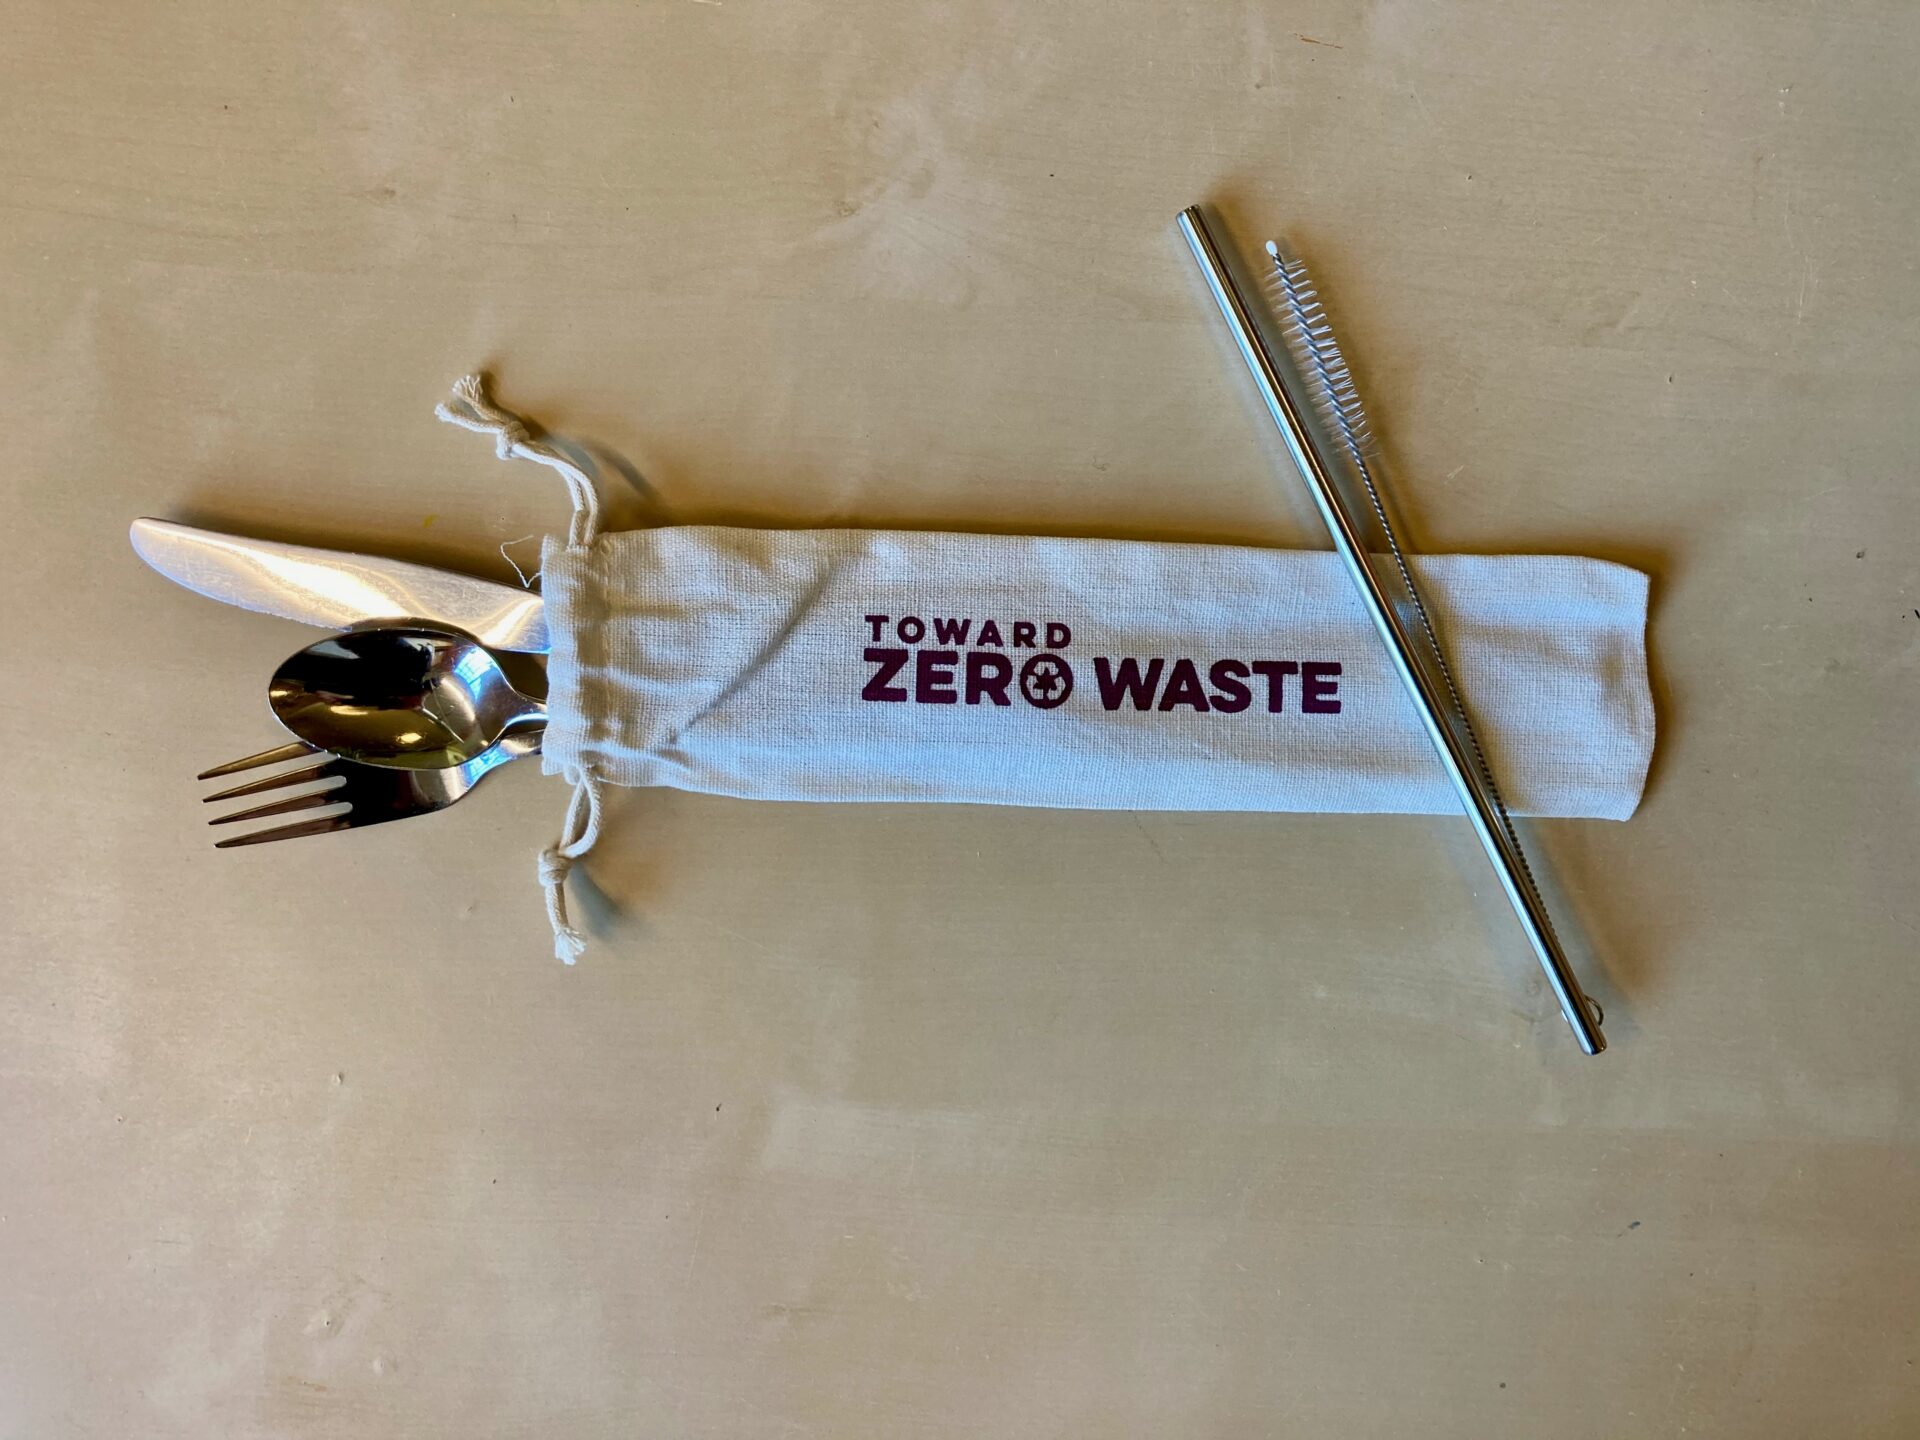 Burlap bag with silverware and a reusable straw with the Toward Zero Waste logo